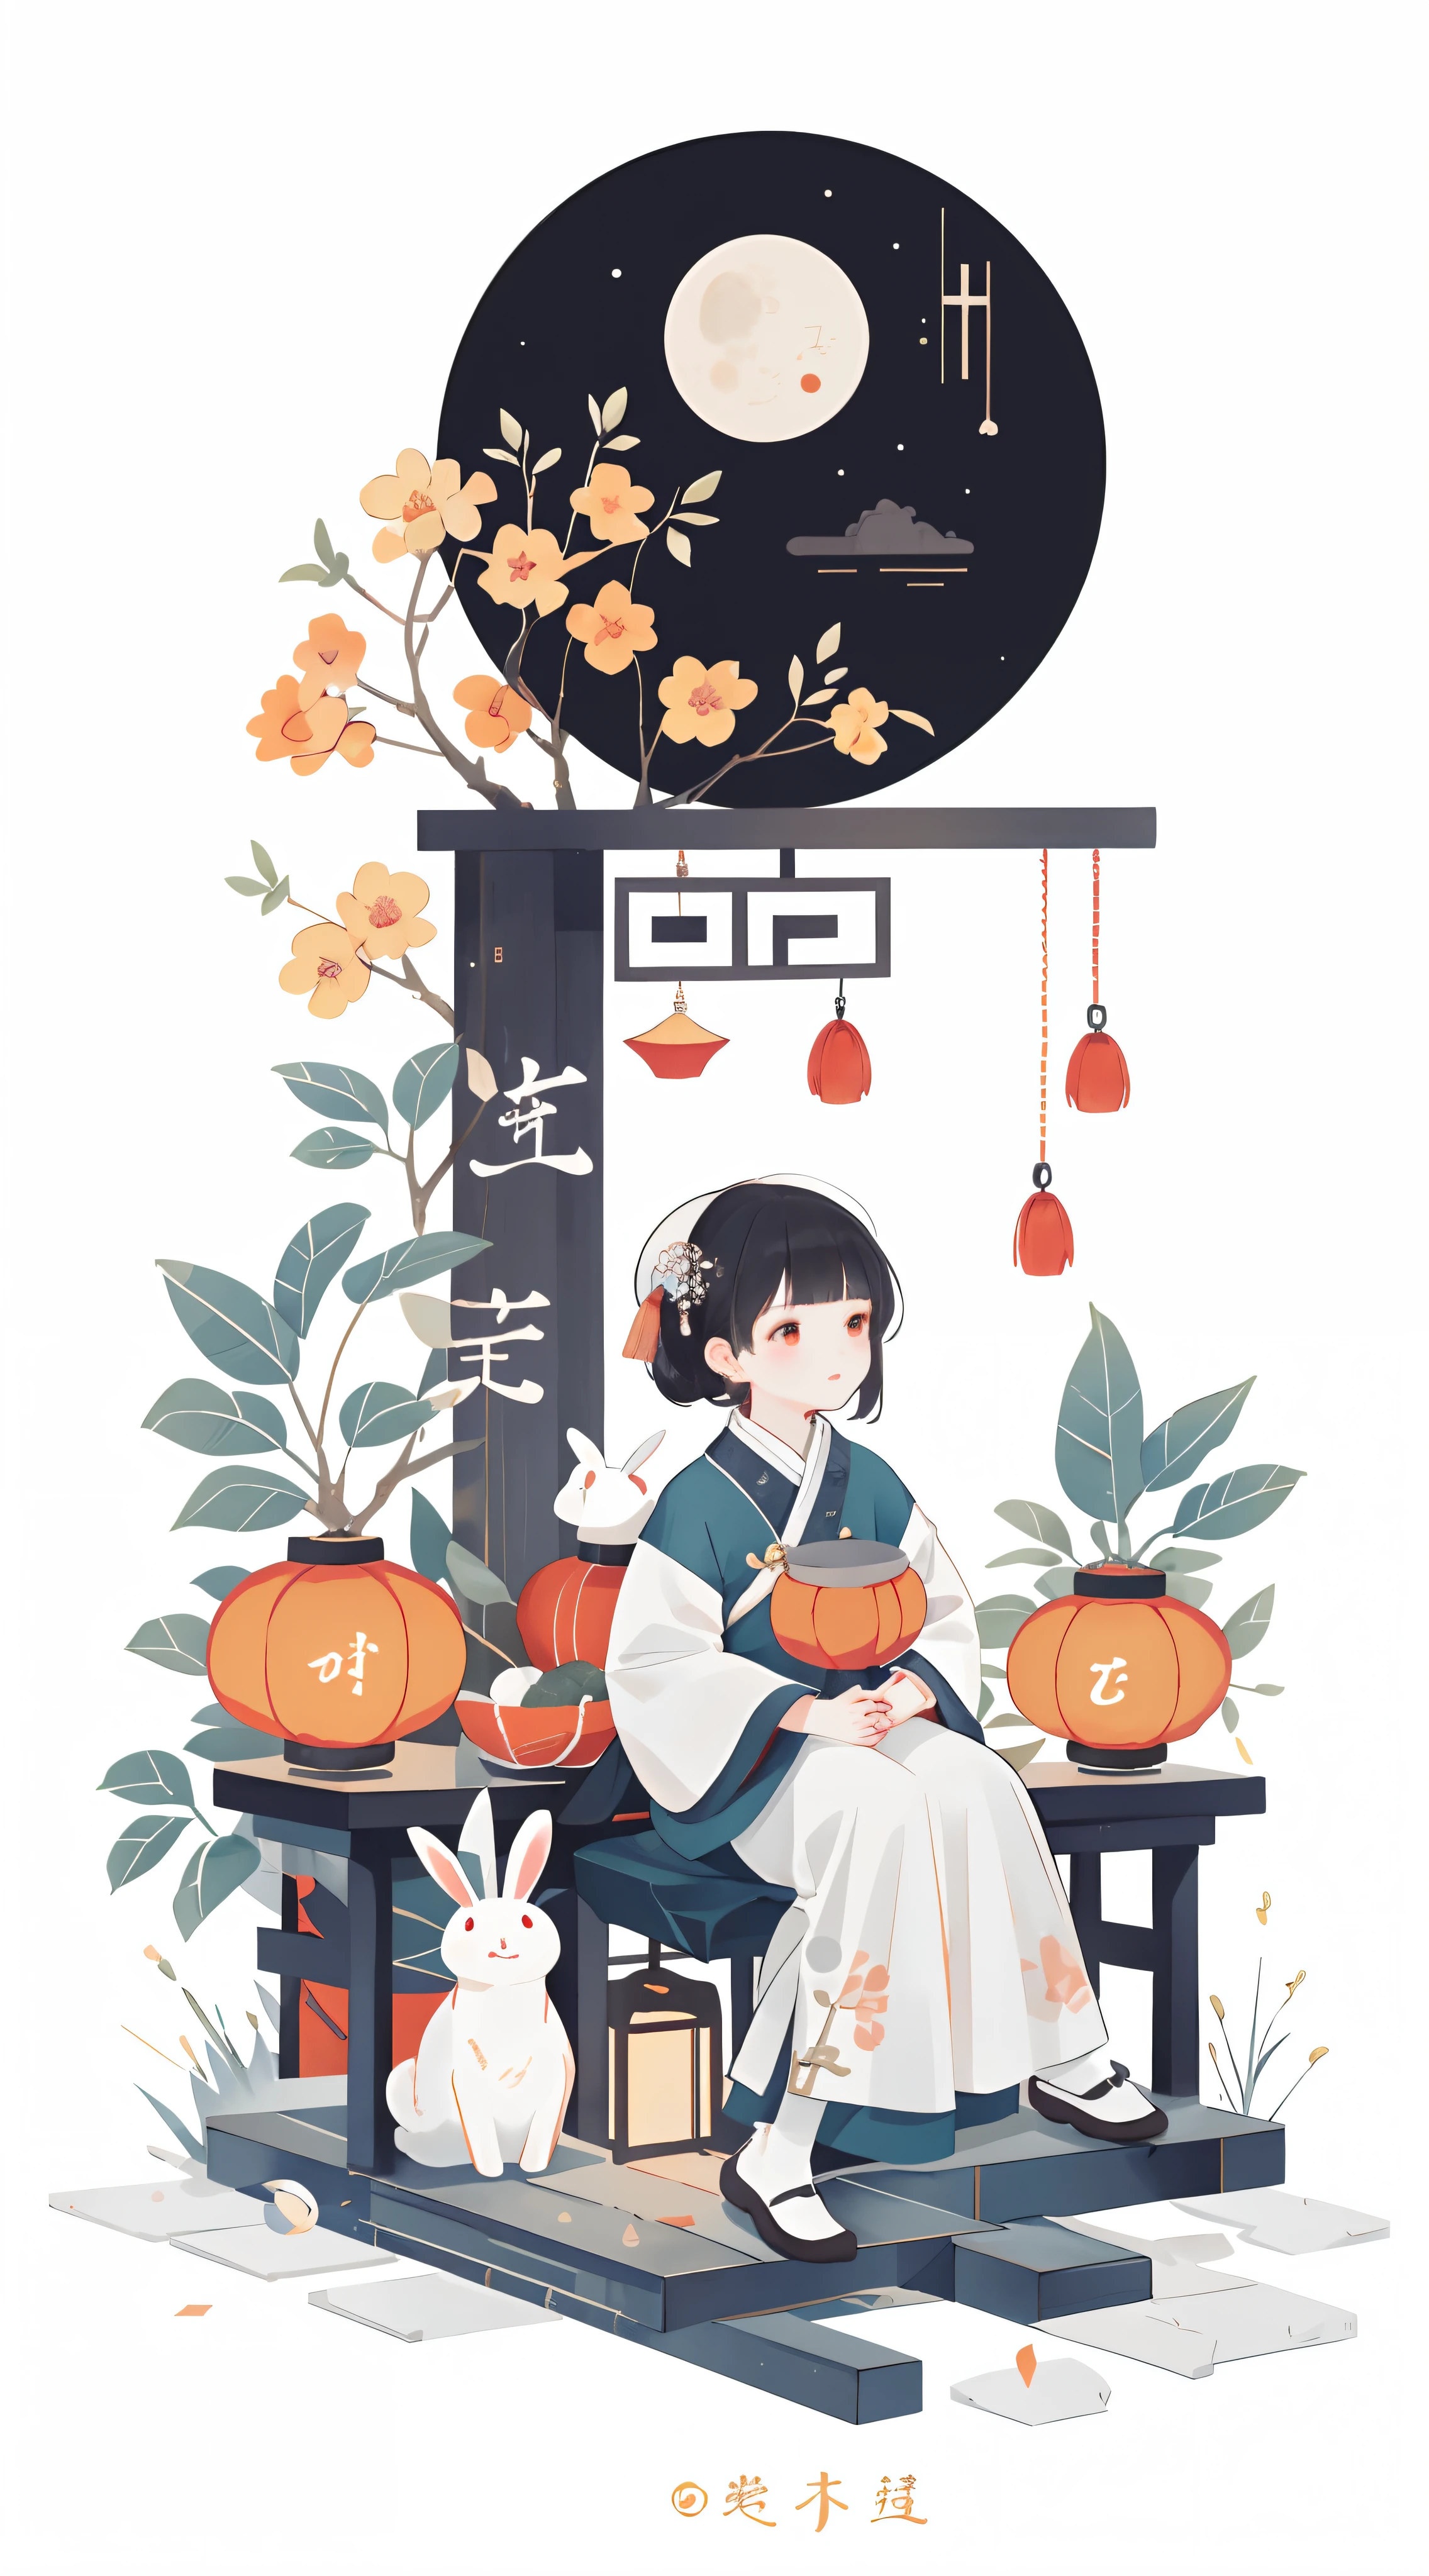 （A rabbit：1.4）, sat on the ground, Looking up, （（Mid-Autumn Festival atmosphere；1.2，sweet osmanthus，Kongming Lantern，Meniscuoon cake）），（Chinese kanji：1.3），Traditional Chinese illustration style, Digital art, Simple background, Masterpiece on white background, Best quality, Ultra-detailed, High quality, 4K